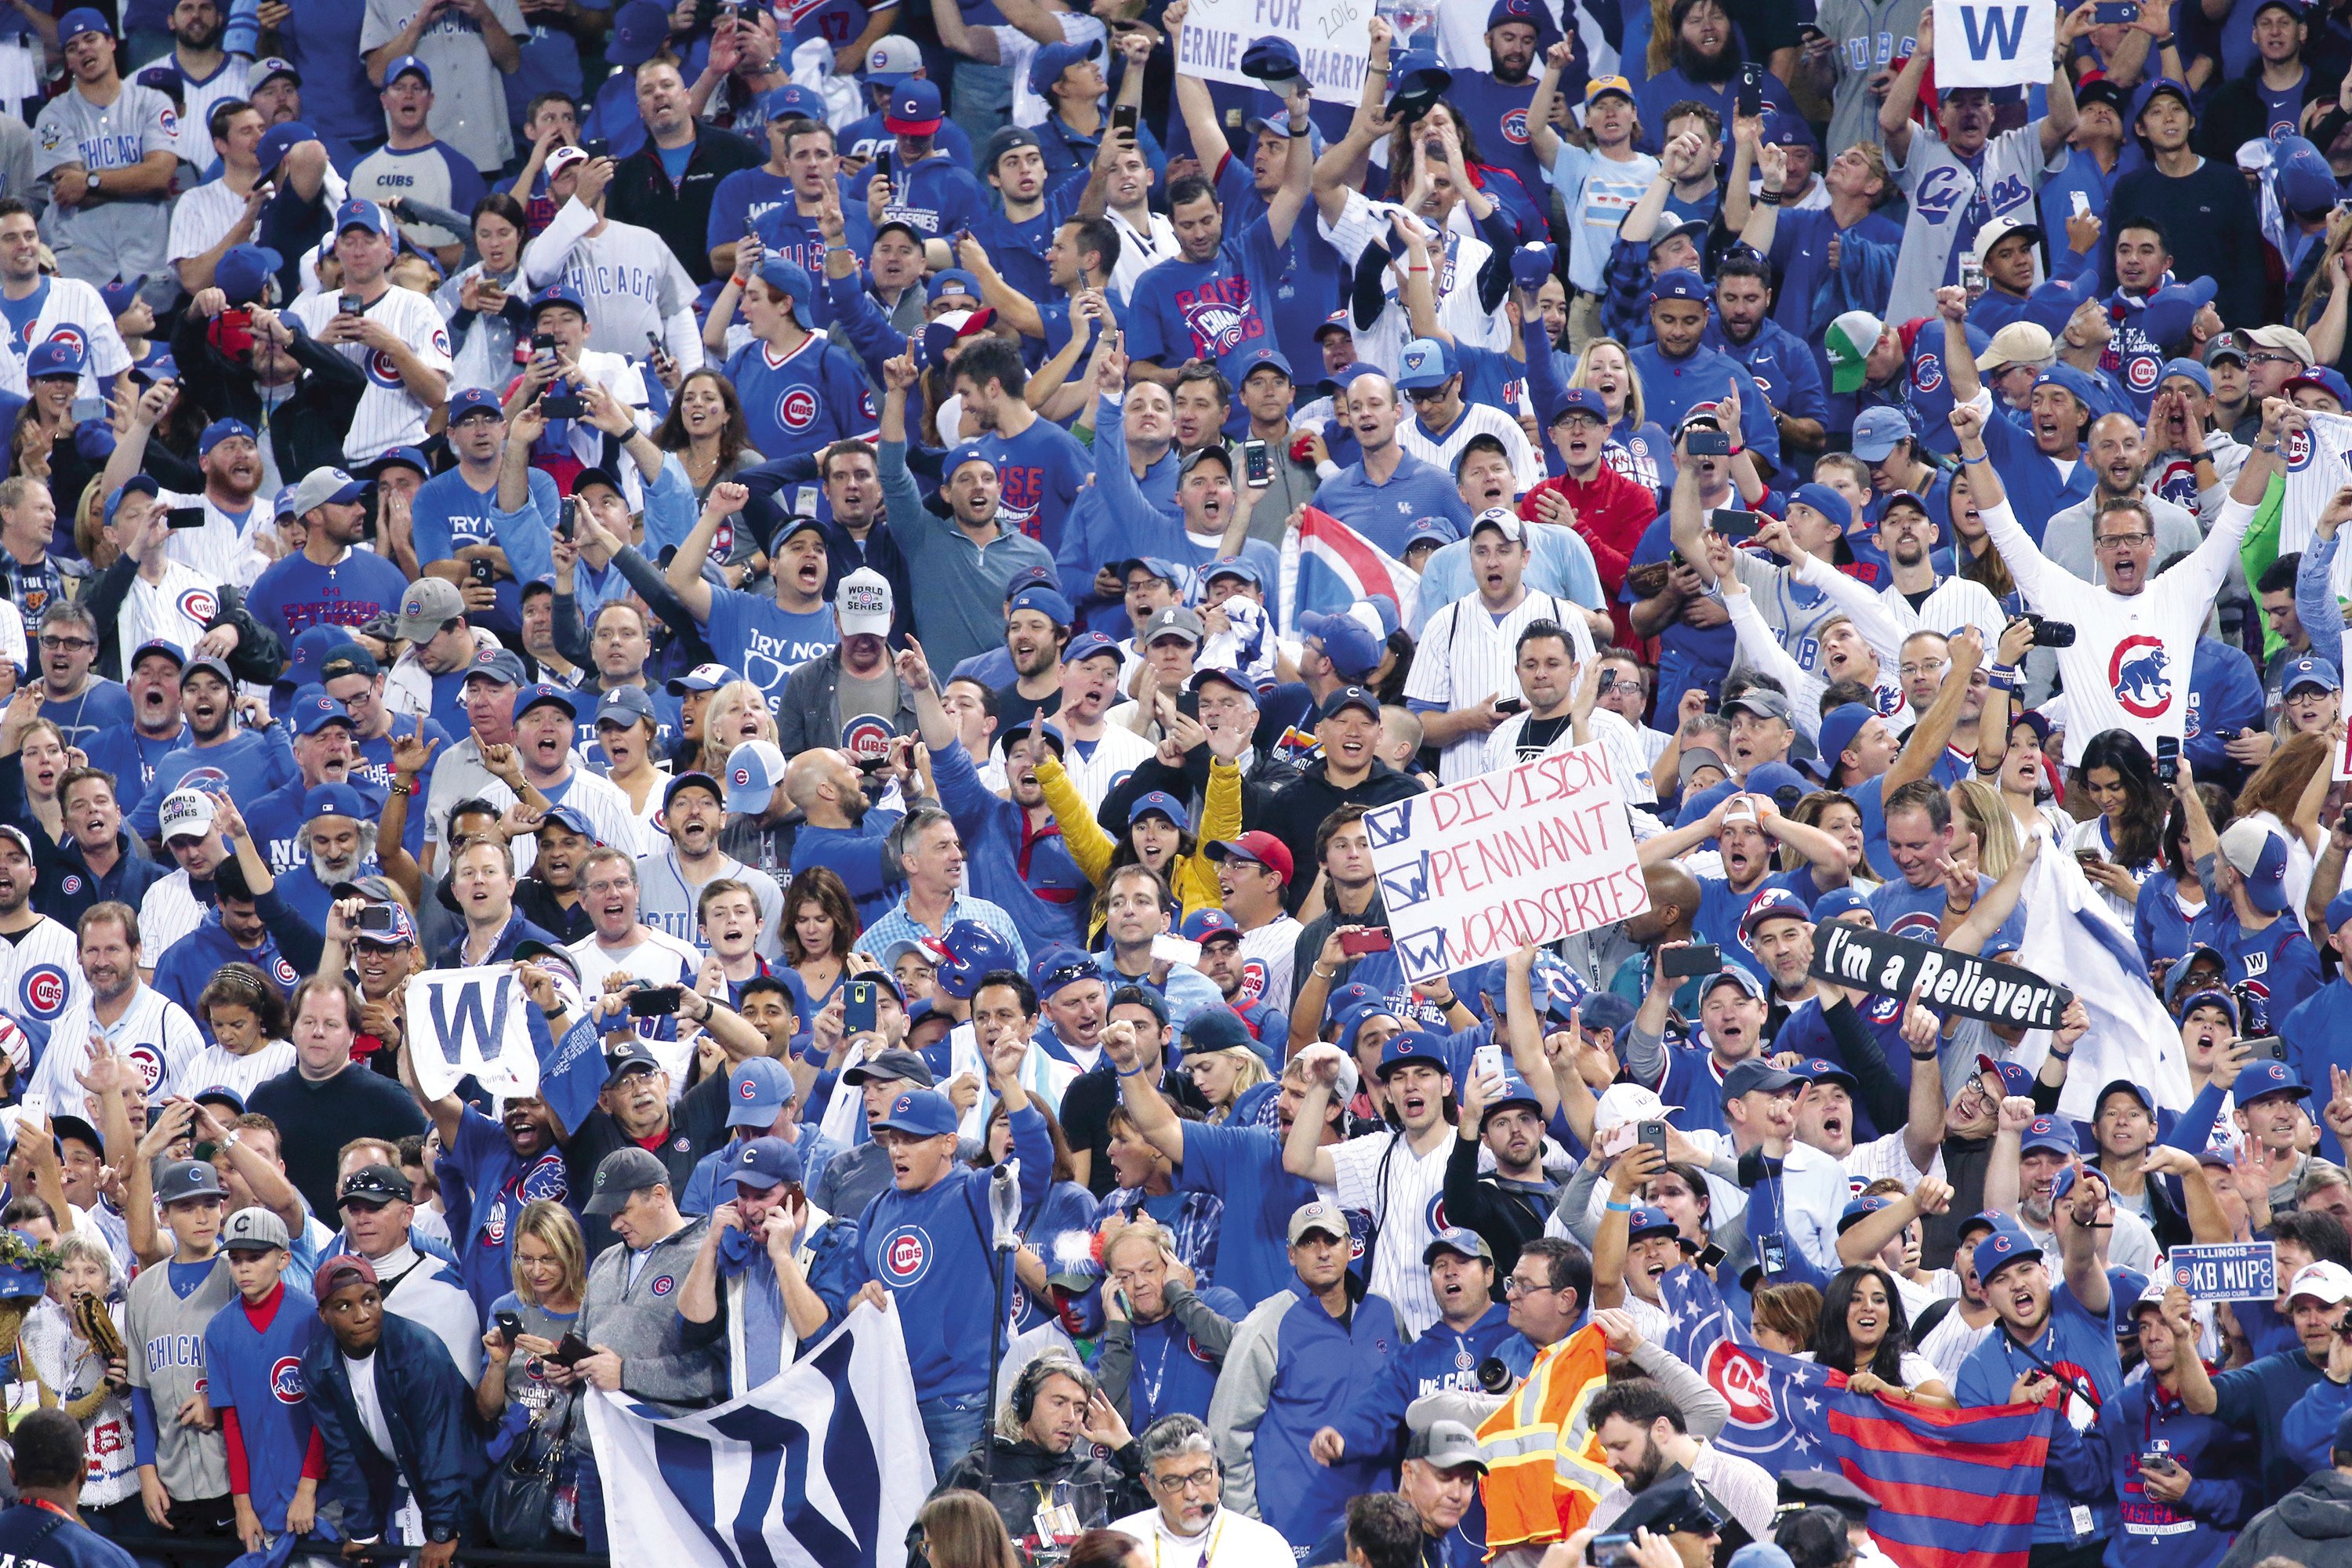 Cubs fans snapping up World Series championship gear